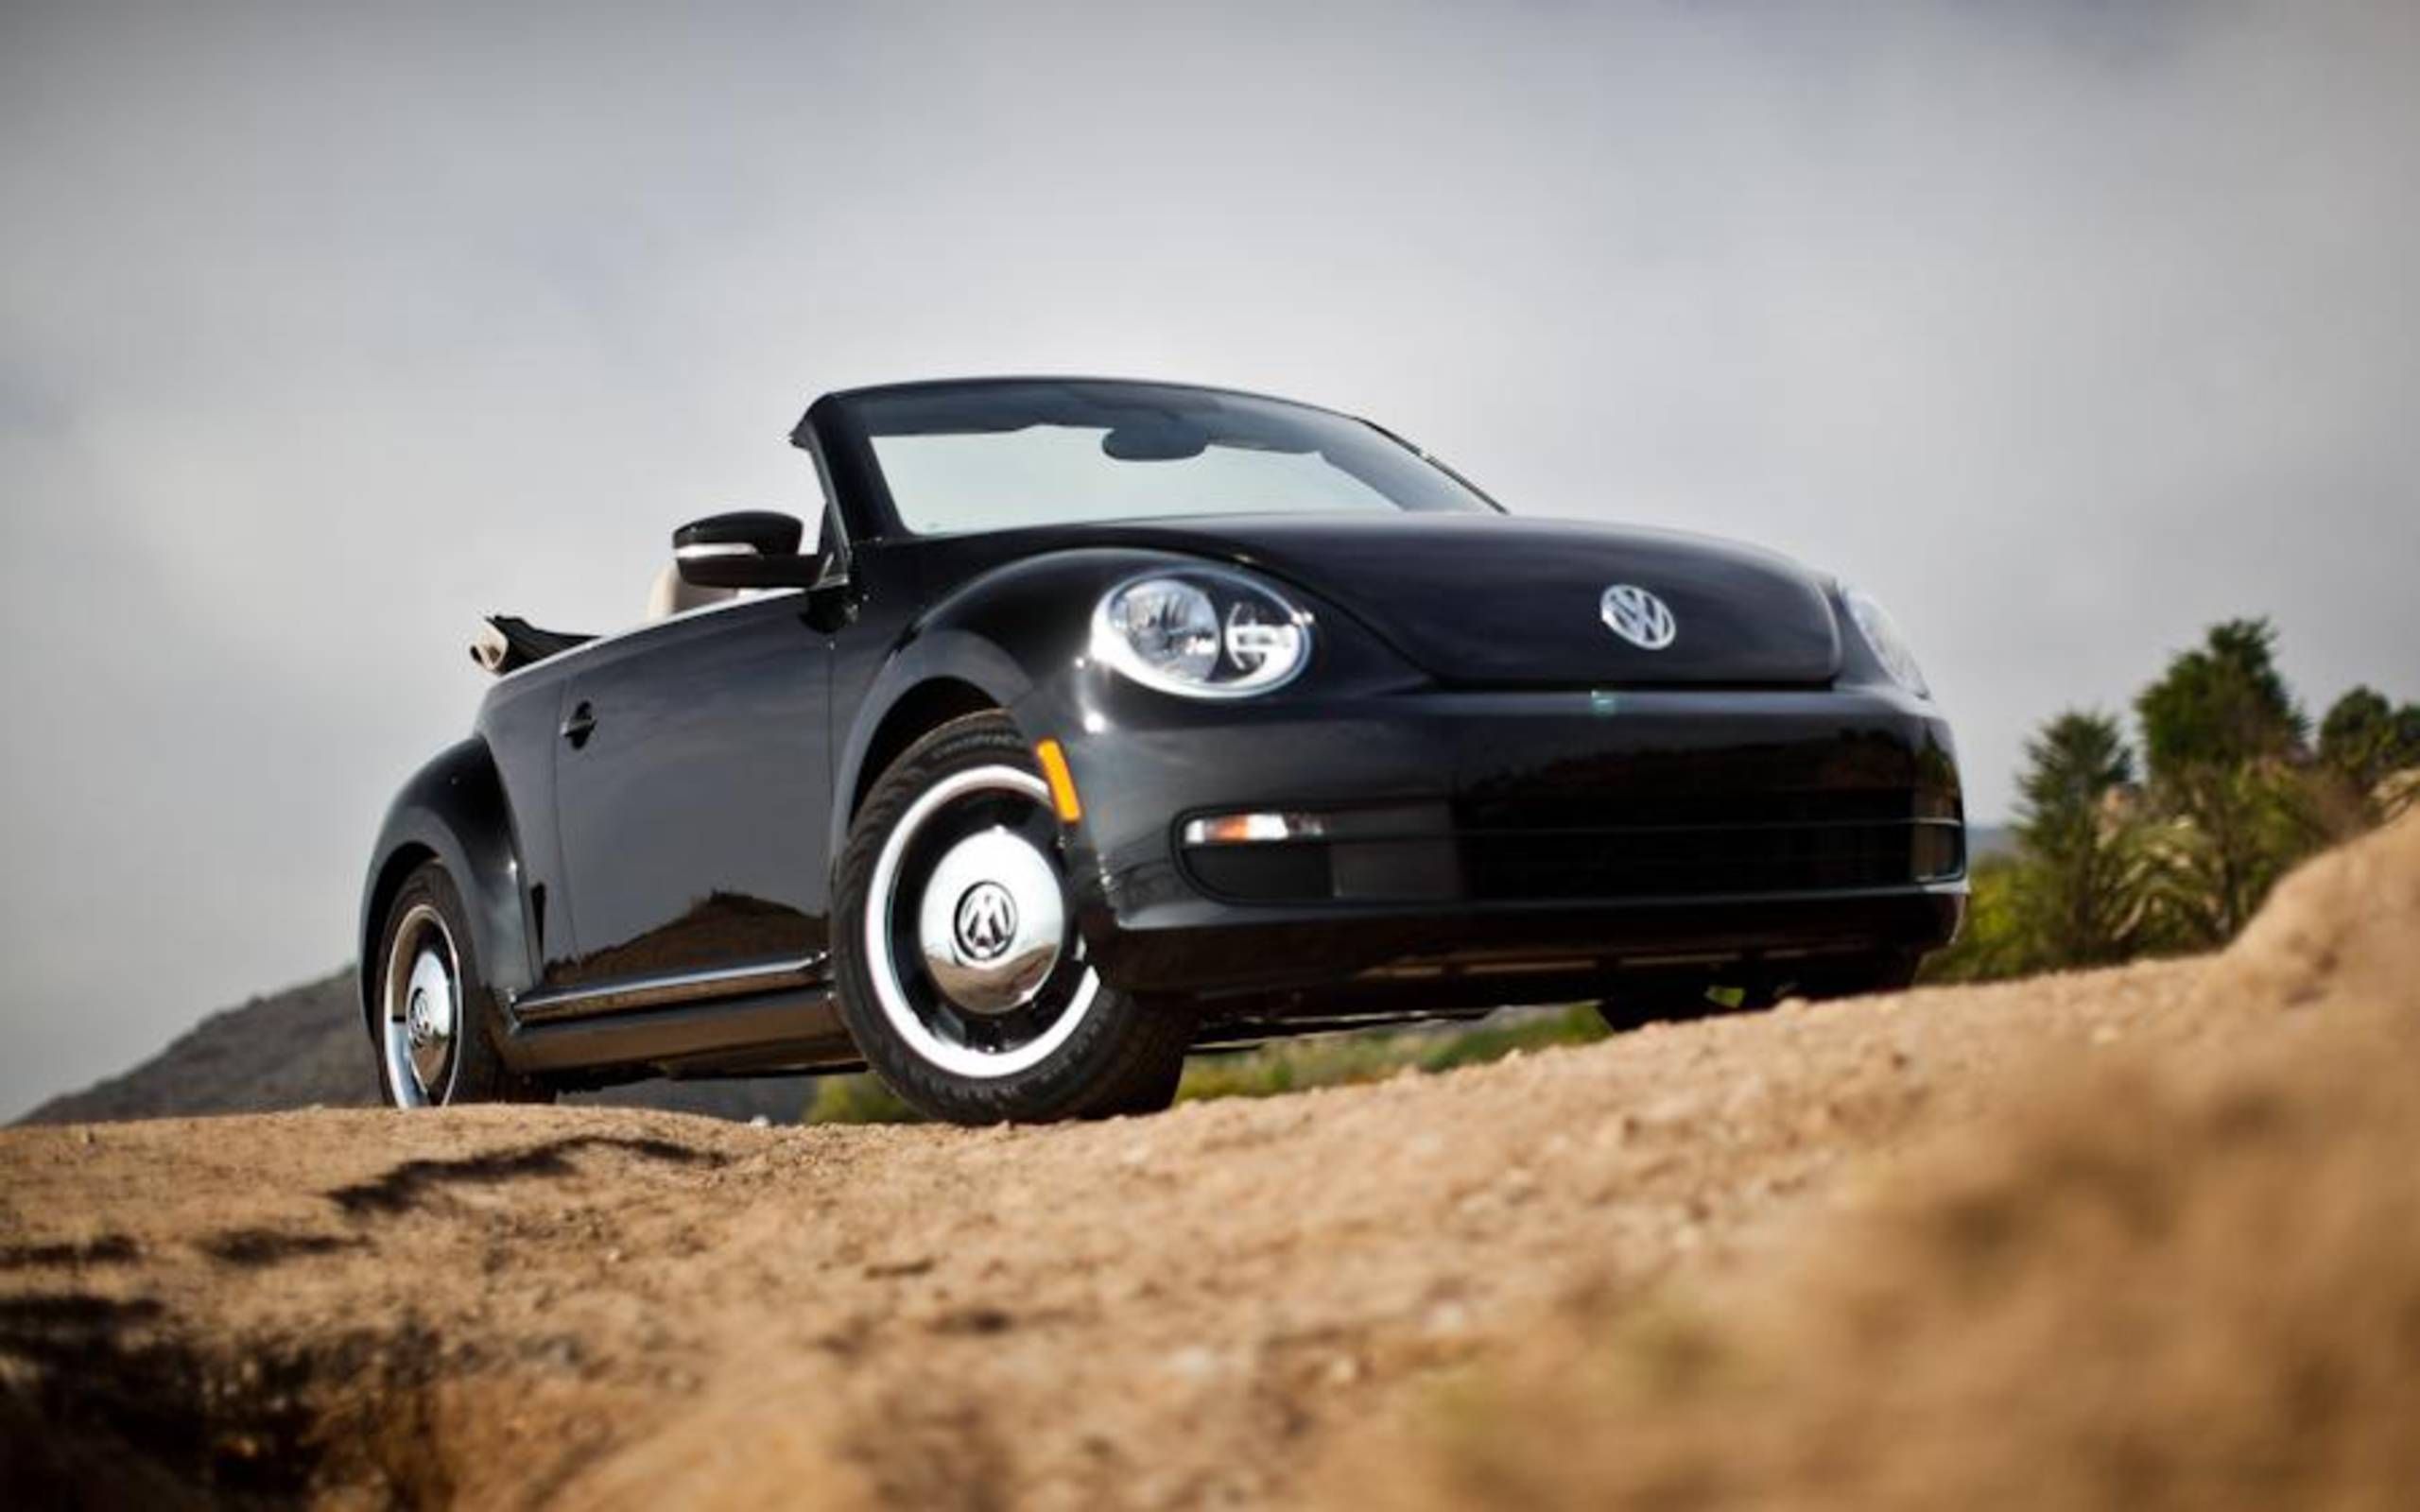 2013 Volkswagen Beetle convertible drive review: New Beetle convertible  will also appear at Los Angeles Auto Show